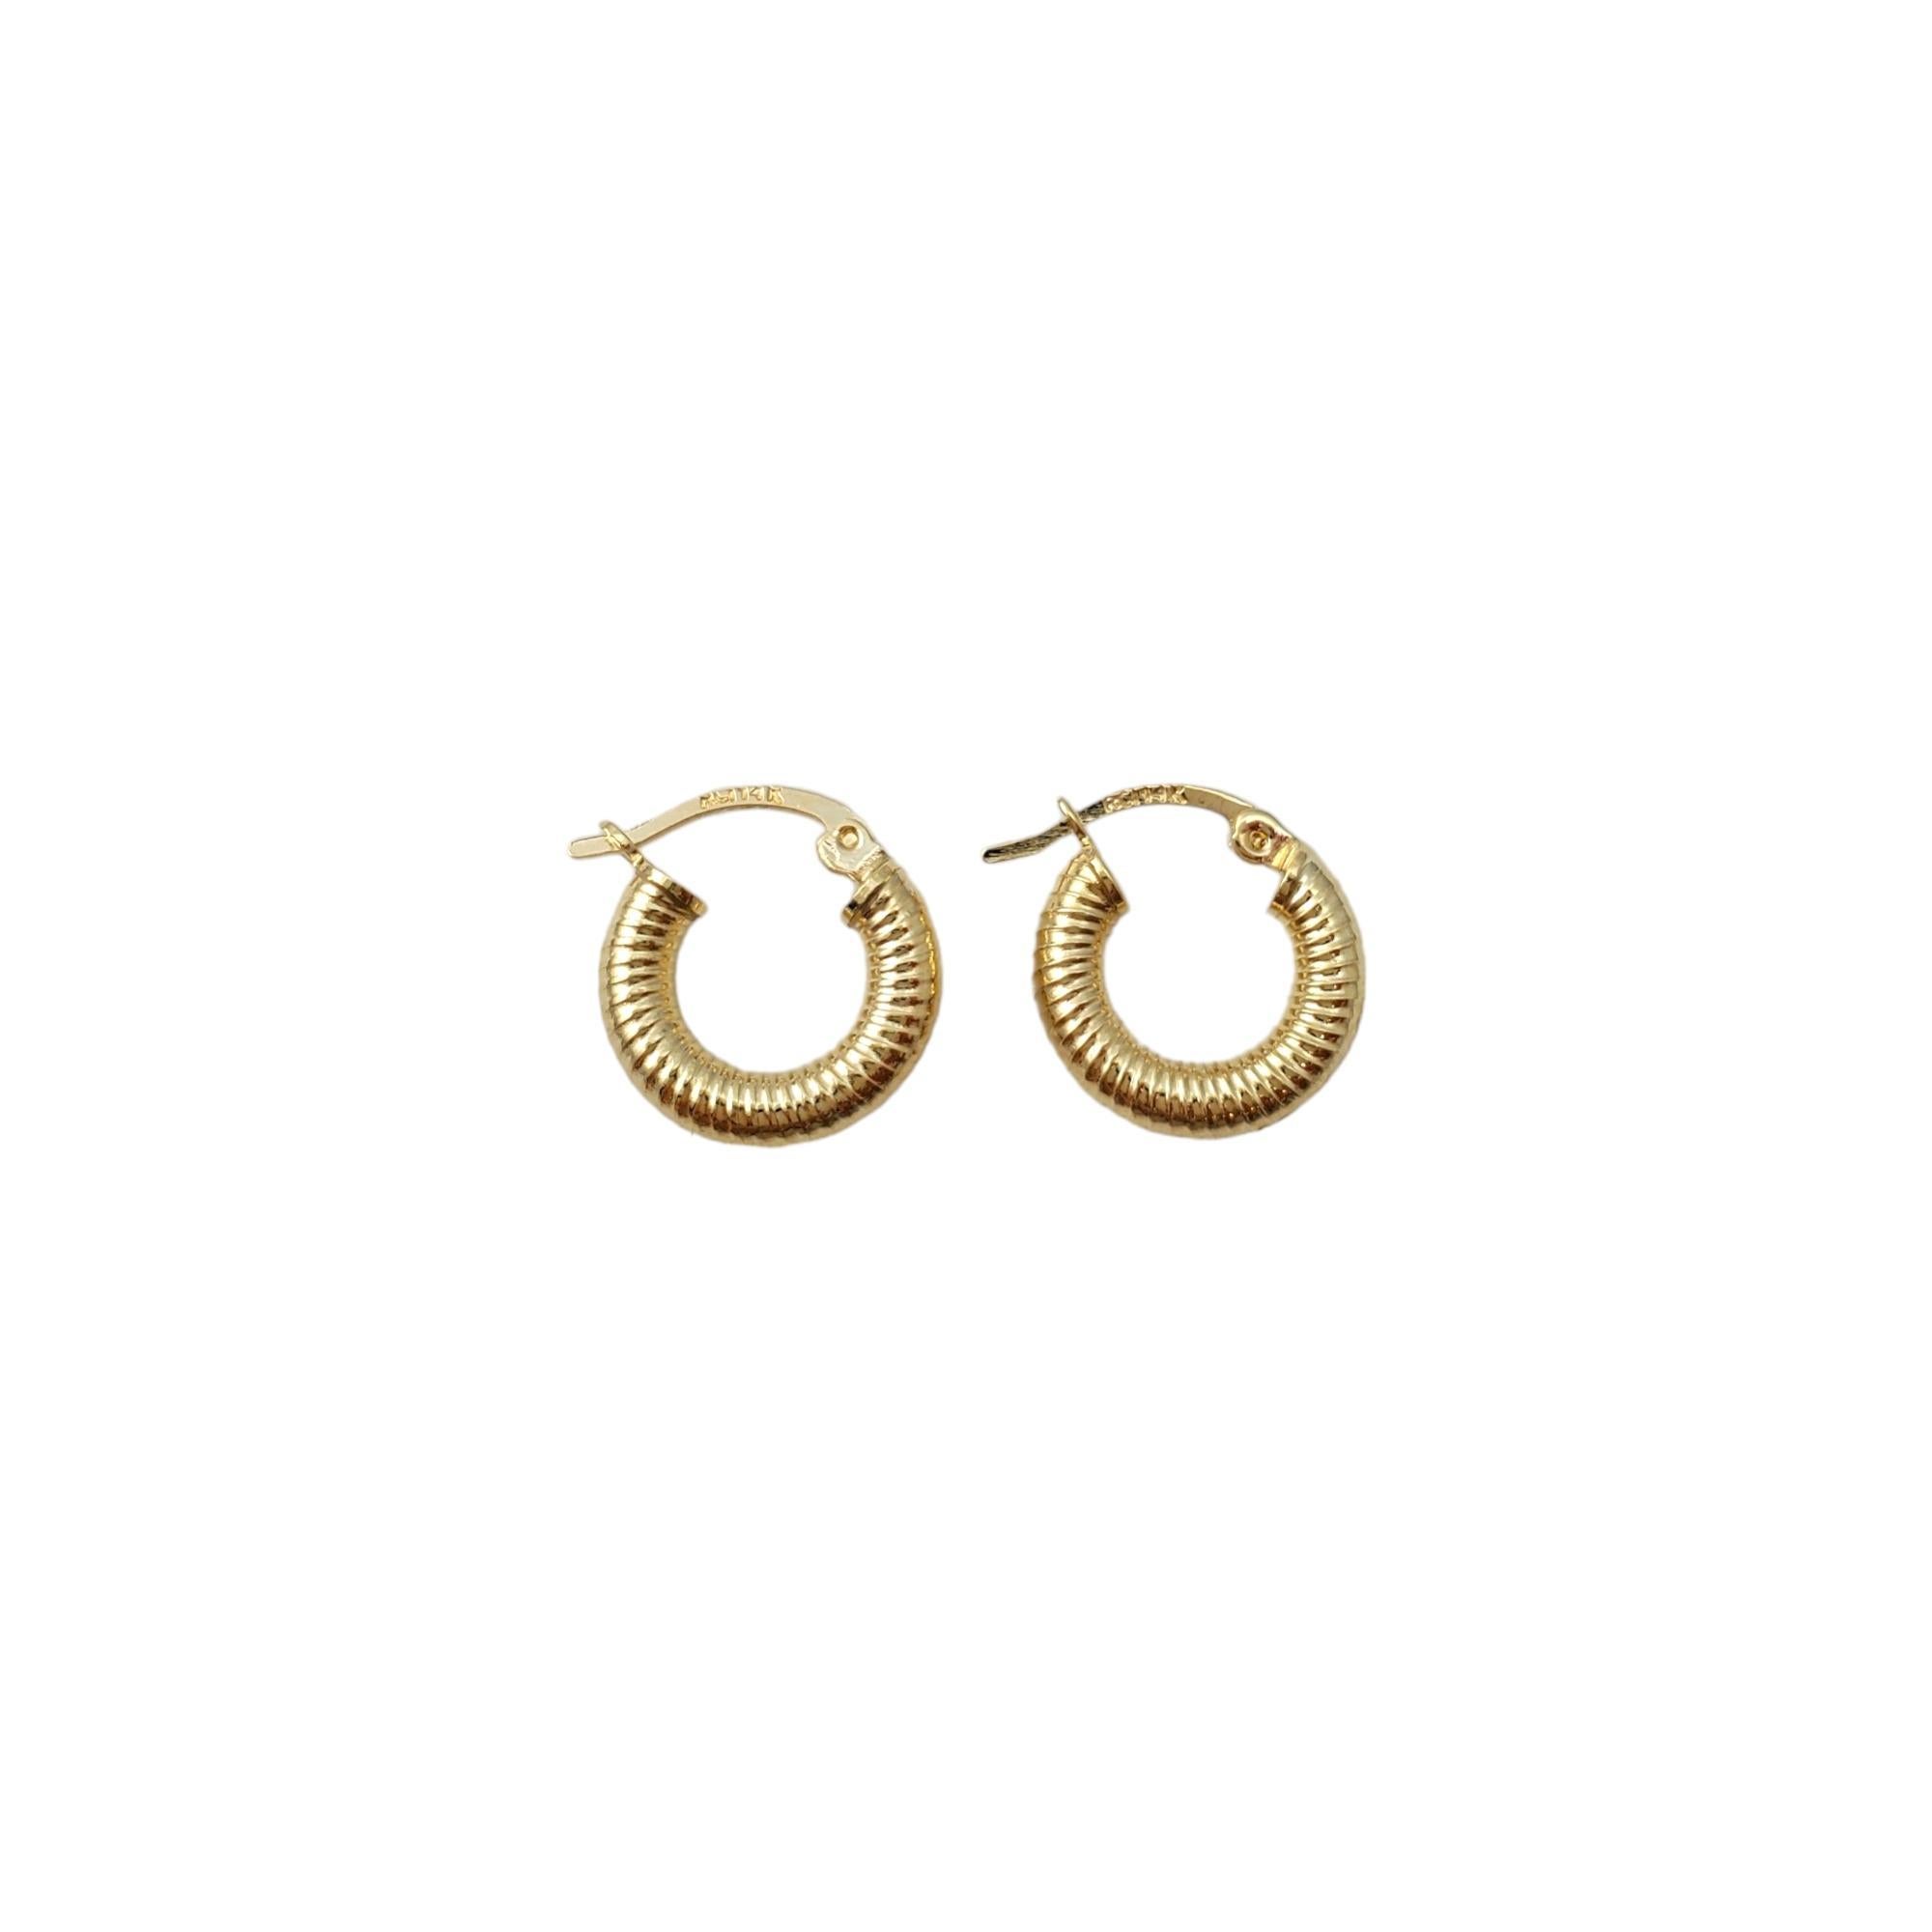 Vintage 14K Yellow Gold Ribbed Small Hoop Earrings -

These dainty earrings serve as a beautiful accessory.

Size:  13.5 mm X 3.0 mm X 3.0 mm

Weight:  0.7 dwt. /  1.1 gr.

Marked: 14K RCI

Very good condition, professionally polished.

Will come